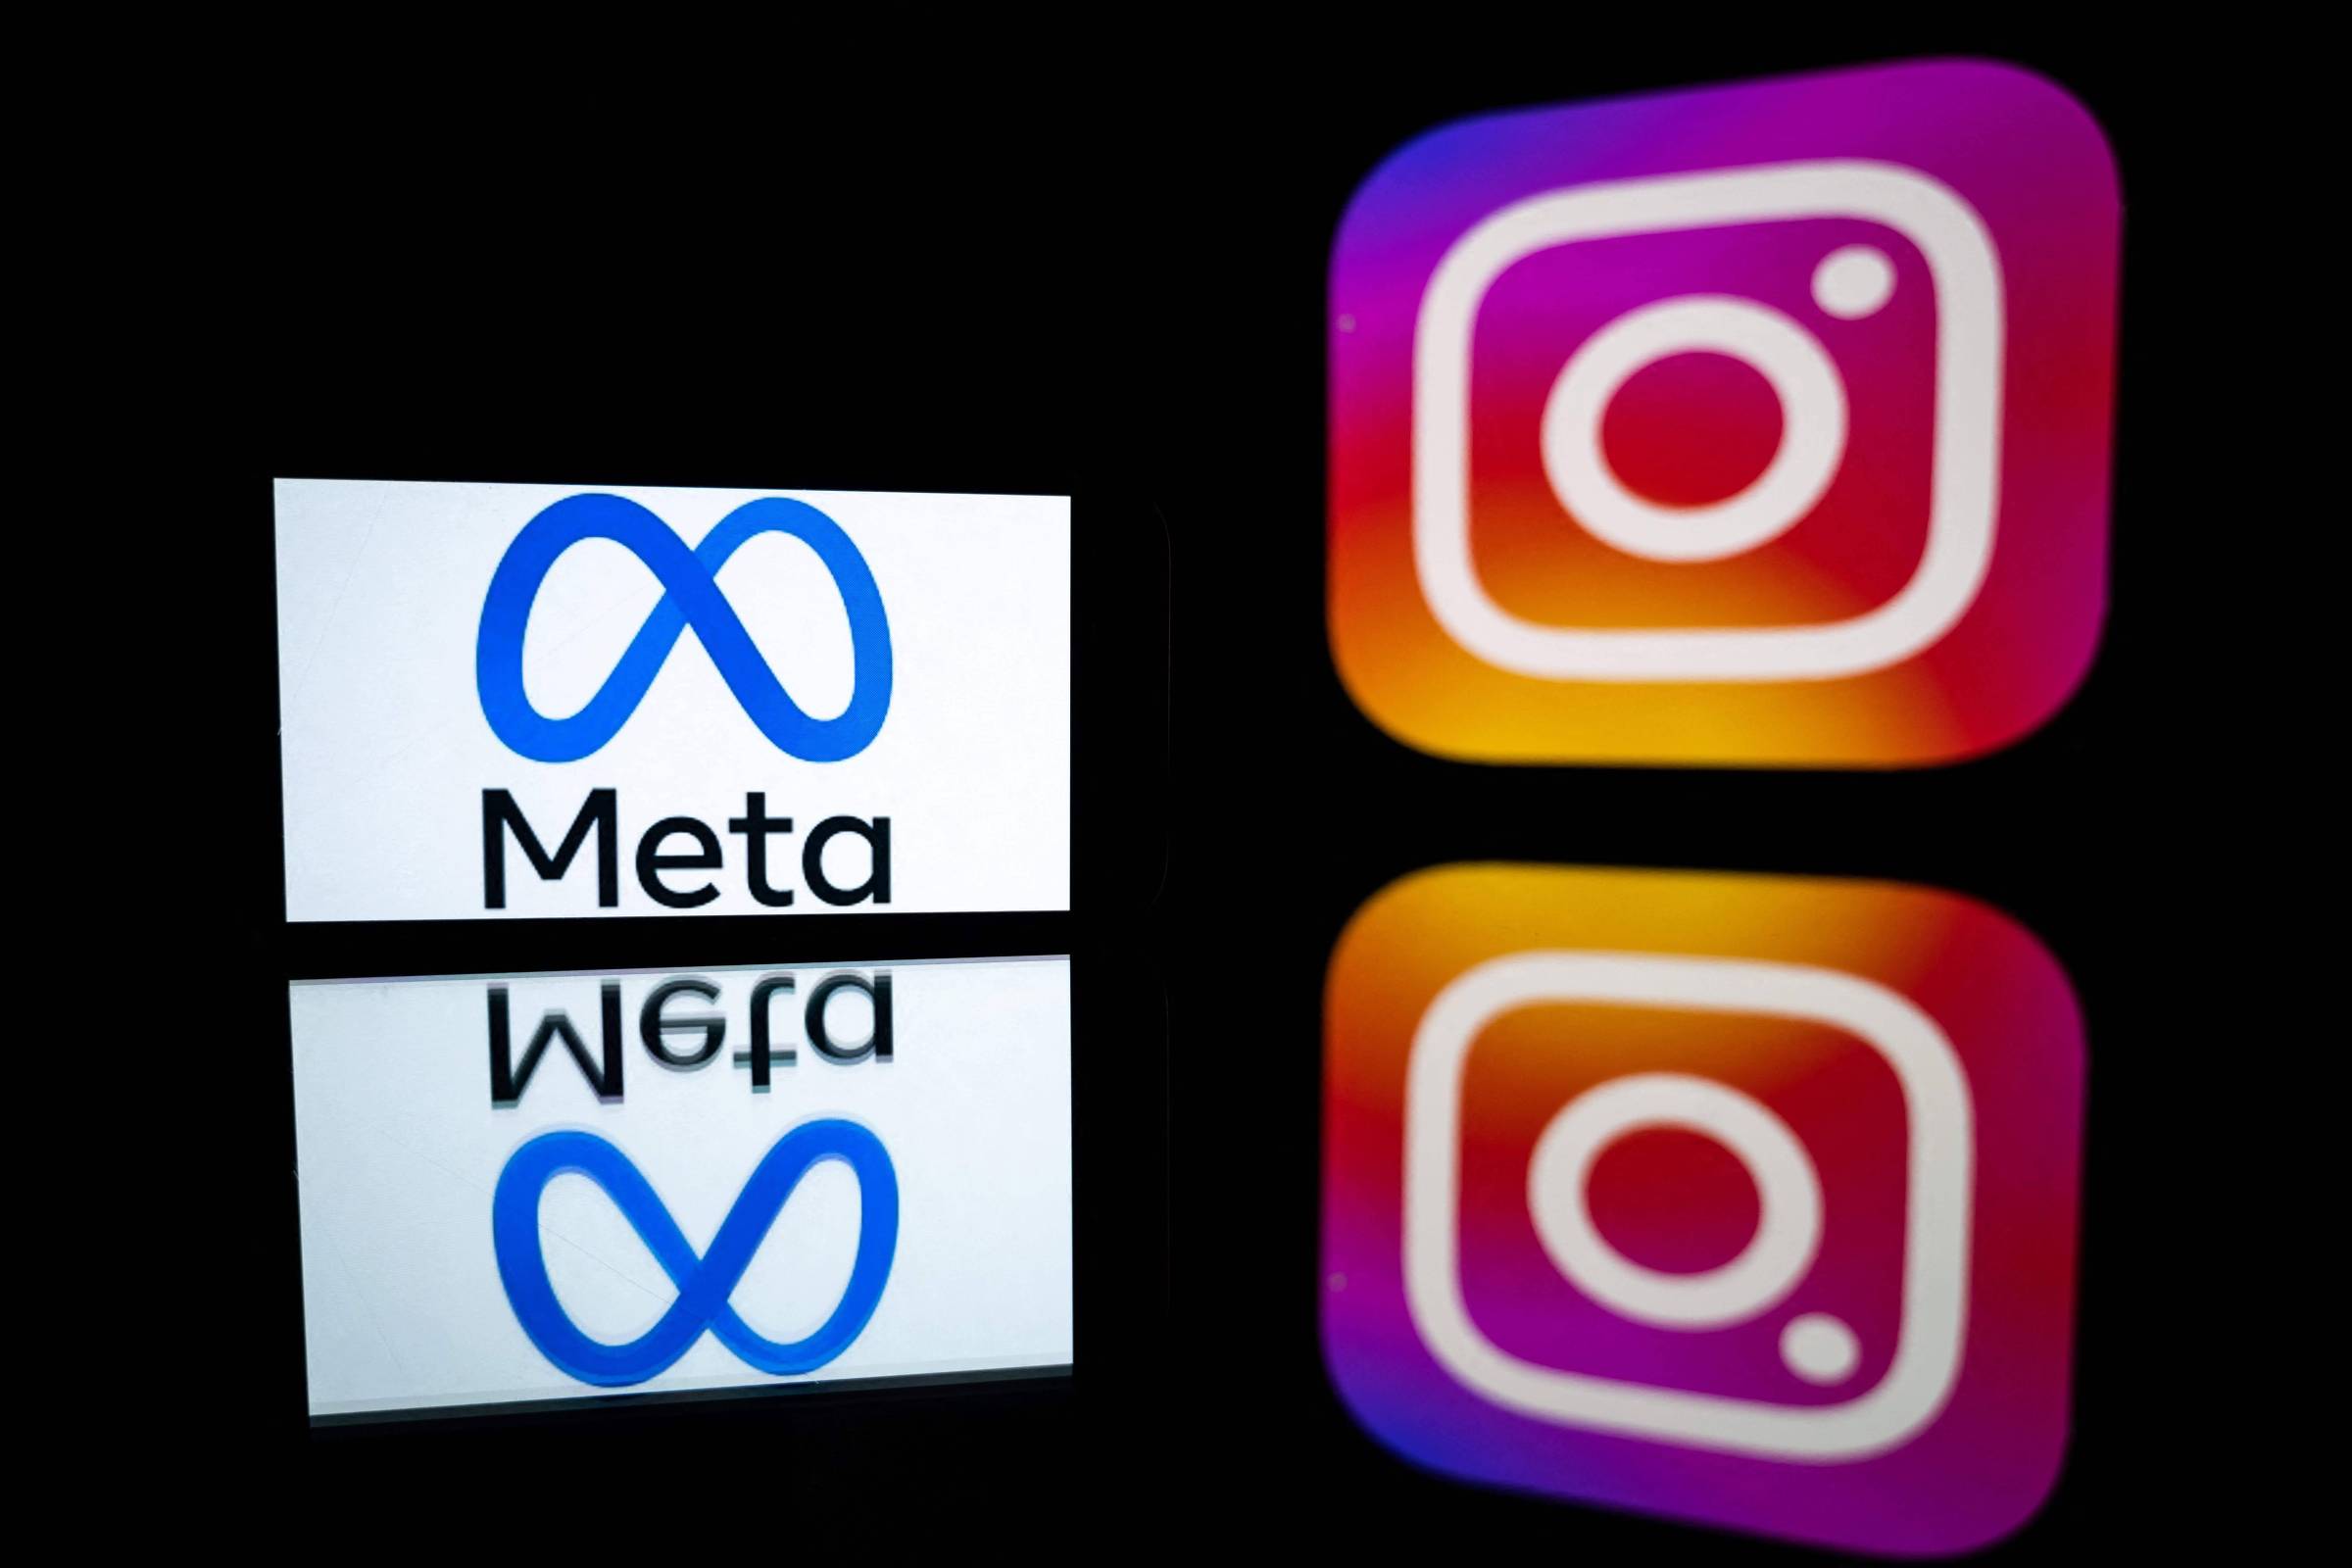 Instagram helped promote network of pedophile accounts, says newspaper